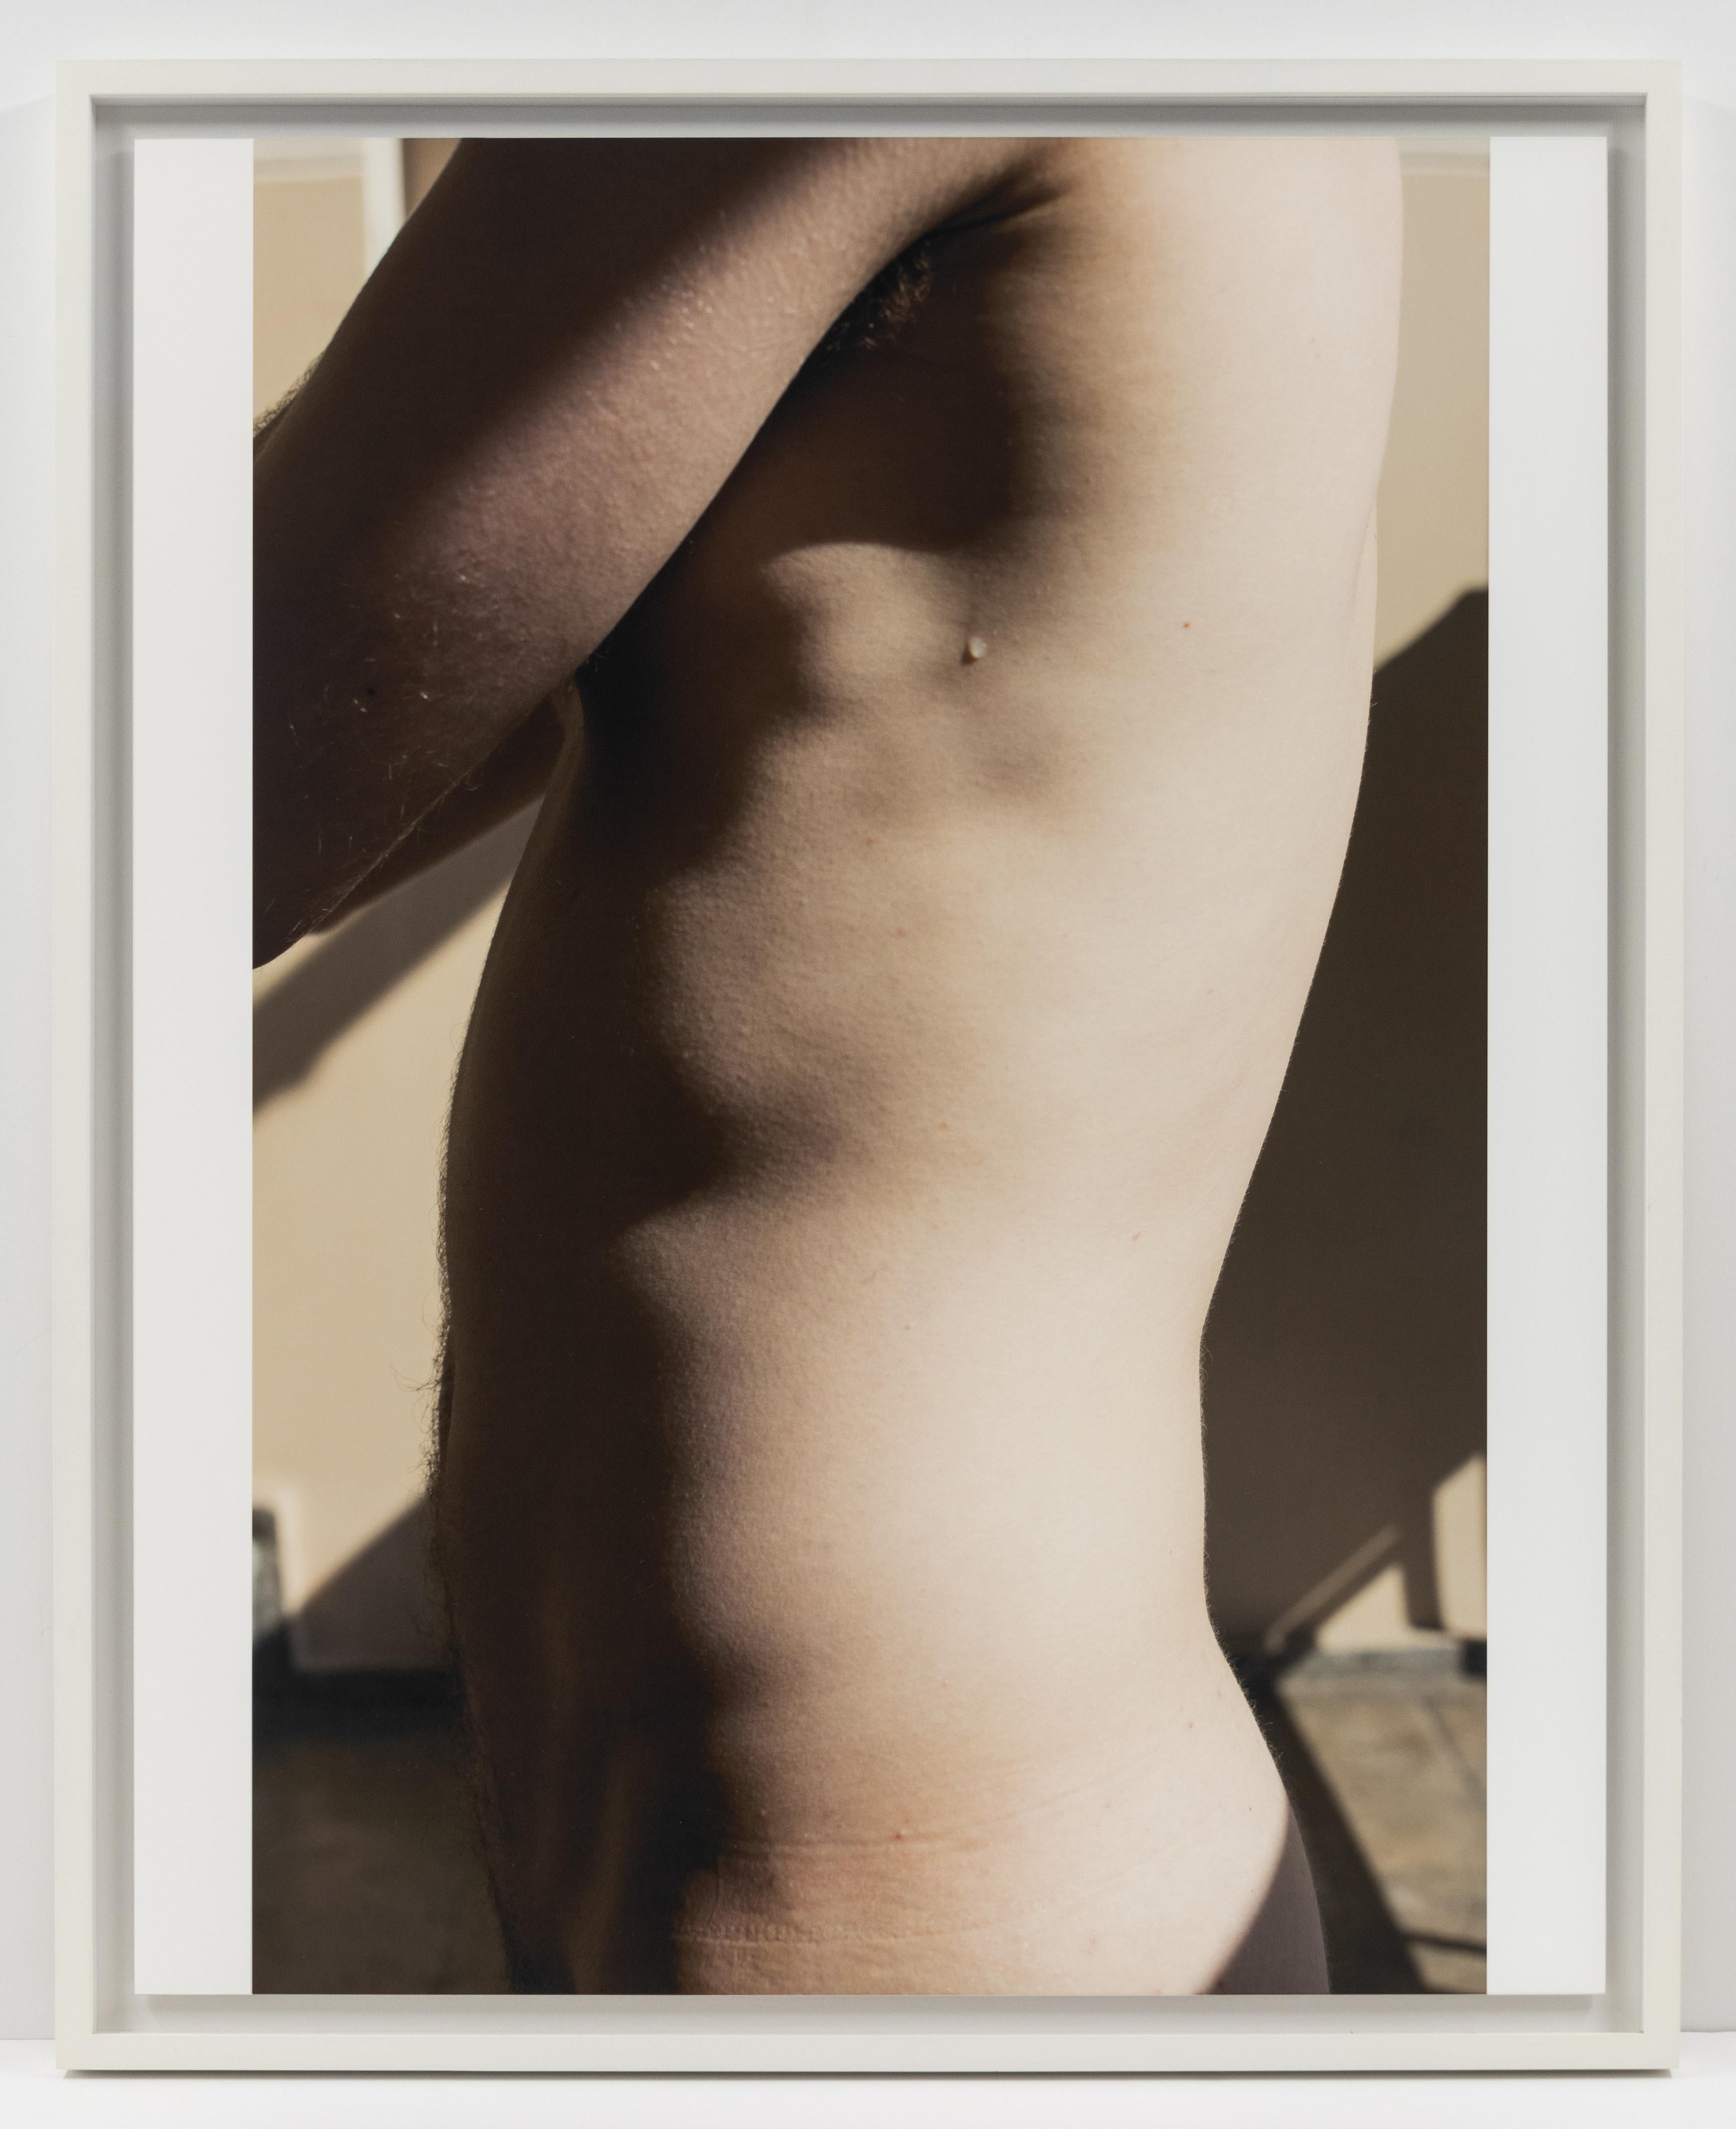 Flanke - Contemporary Photograph by Wolfgang Tillmans